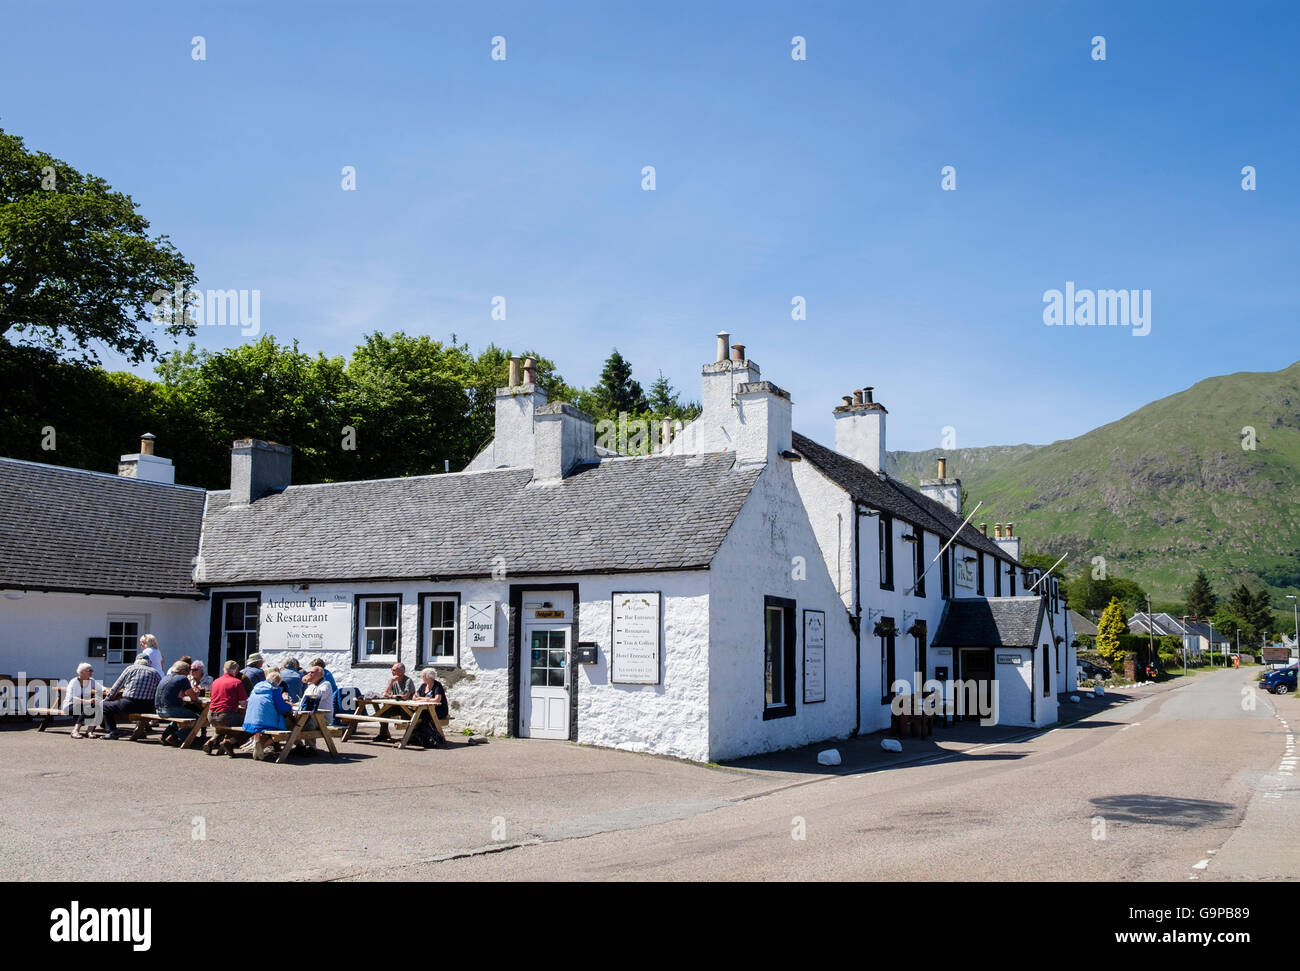 The Inn at Ardgour is a traditional country pub and hotel in summer. Corran Fort William Inverness-shire Highland Scotland UK Britain Stock Photo